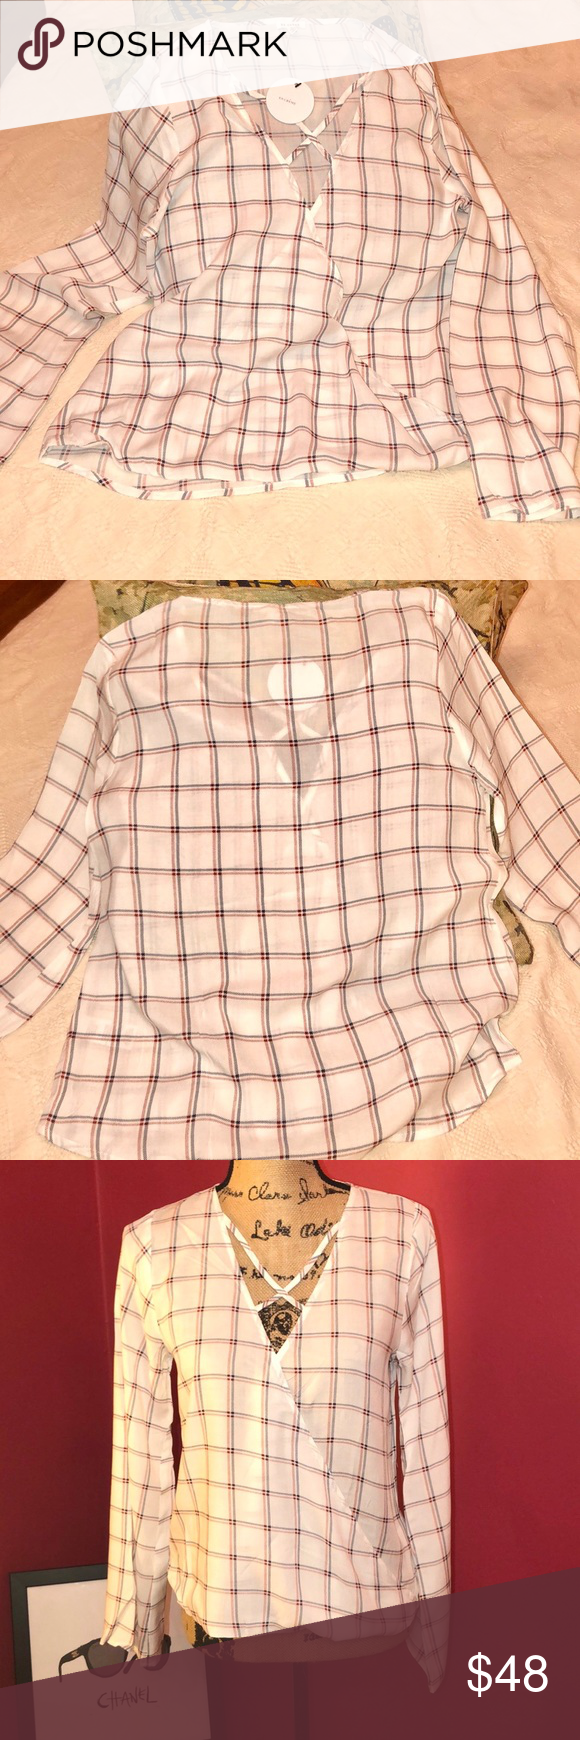 💃Adorable Plaid Blouse Brand new from my boutique. Adorable plaid blouse, wit…